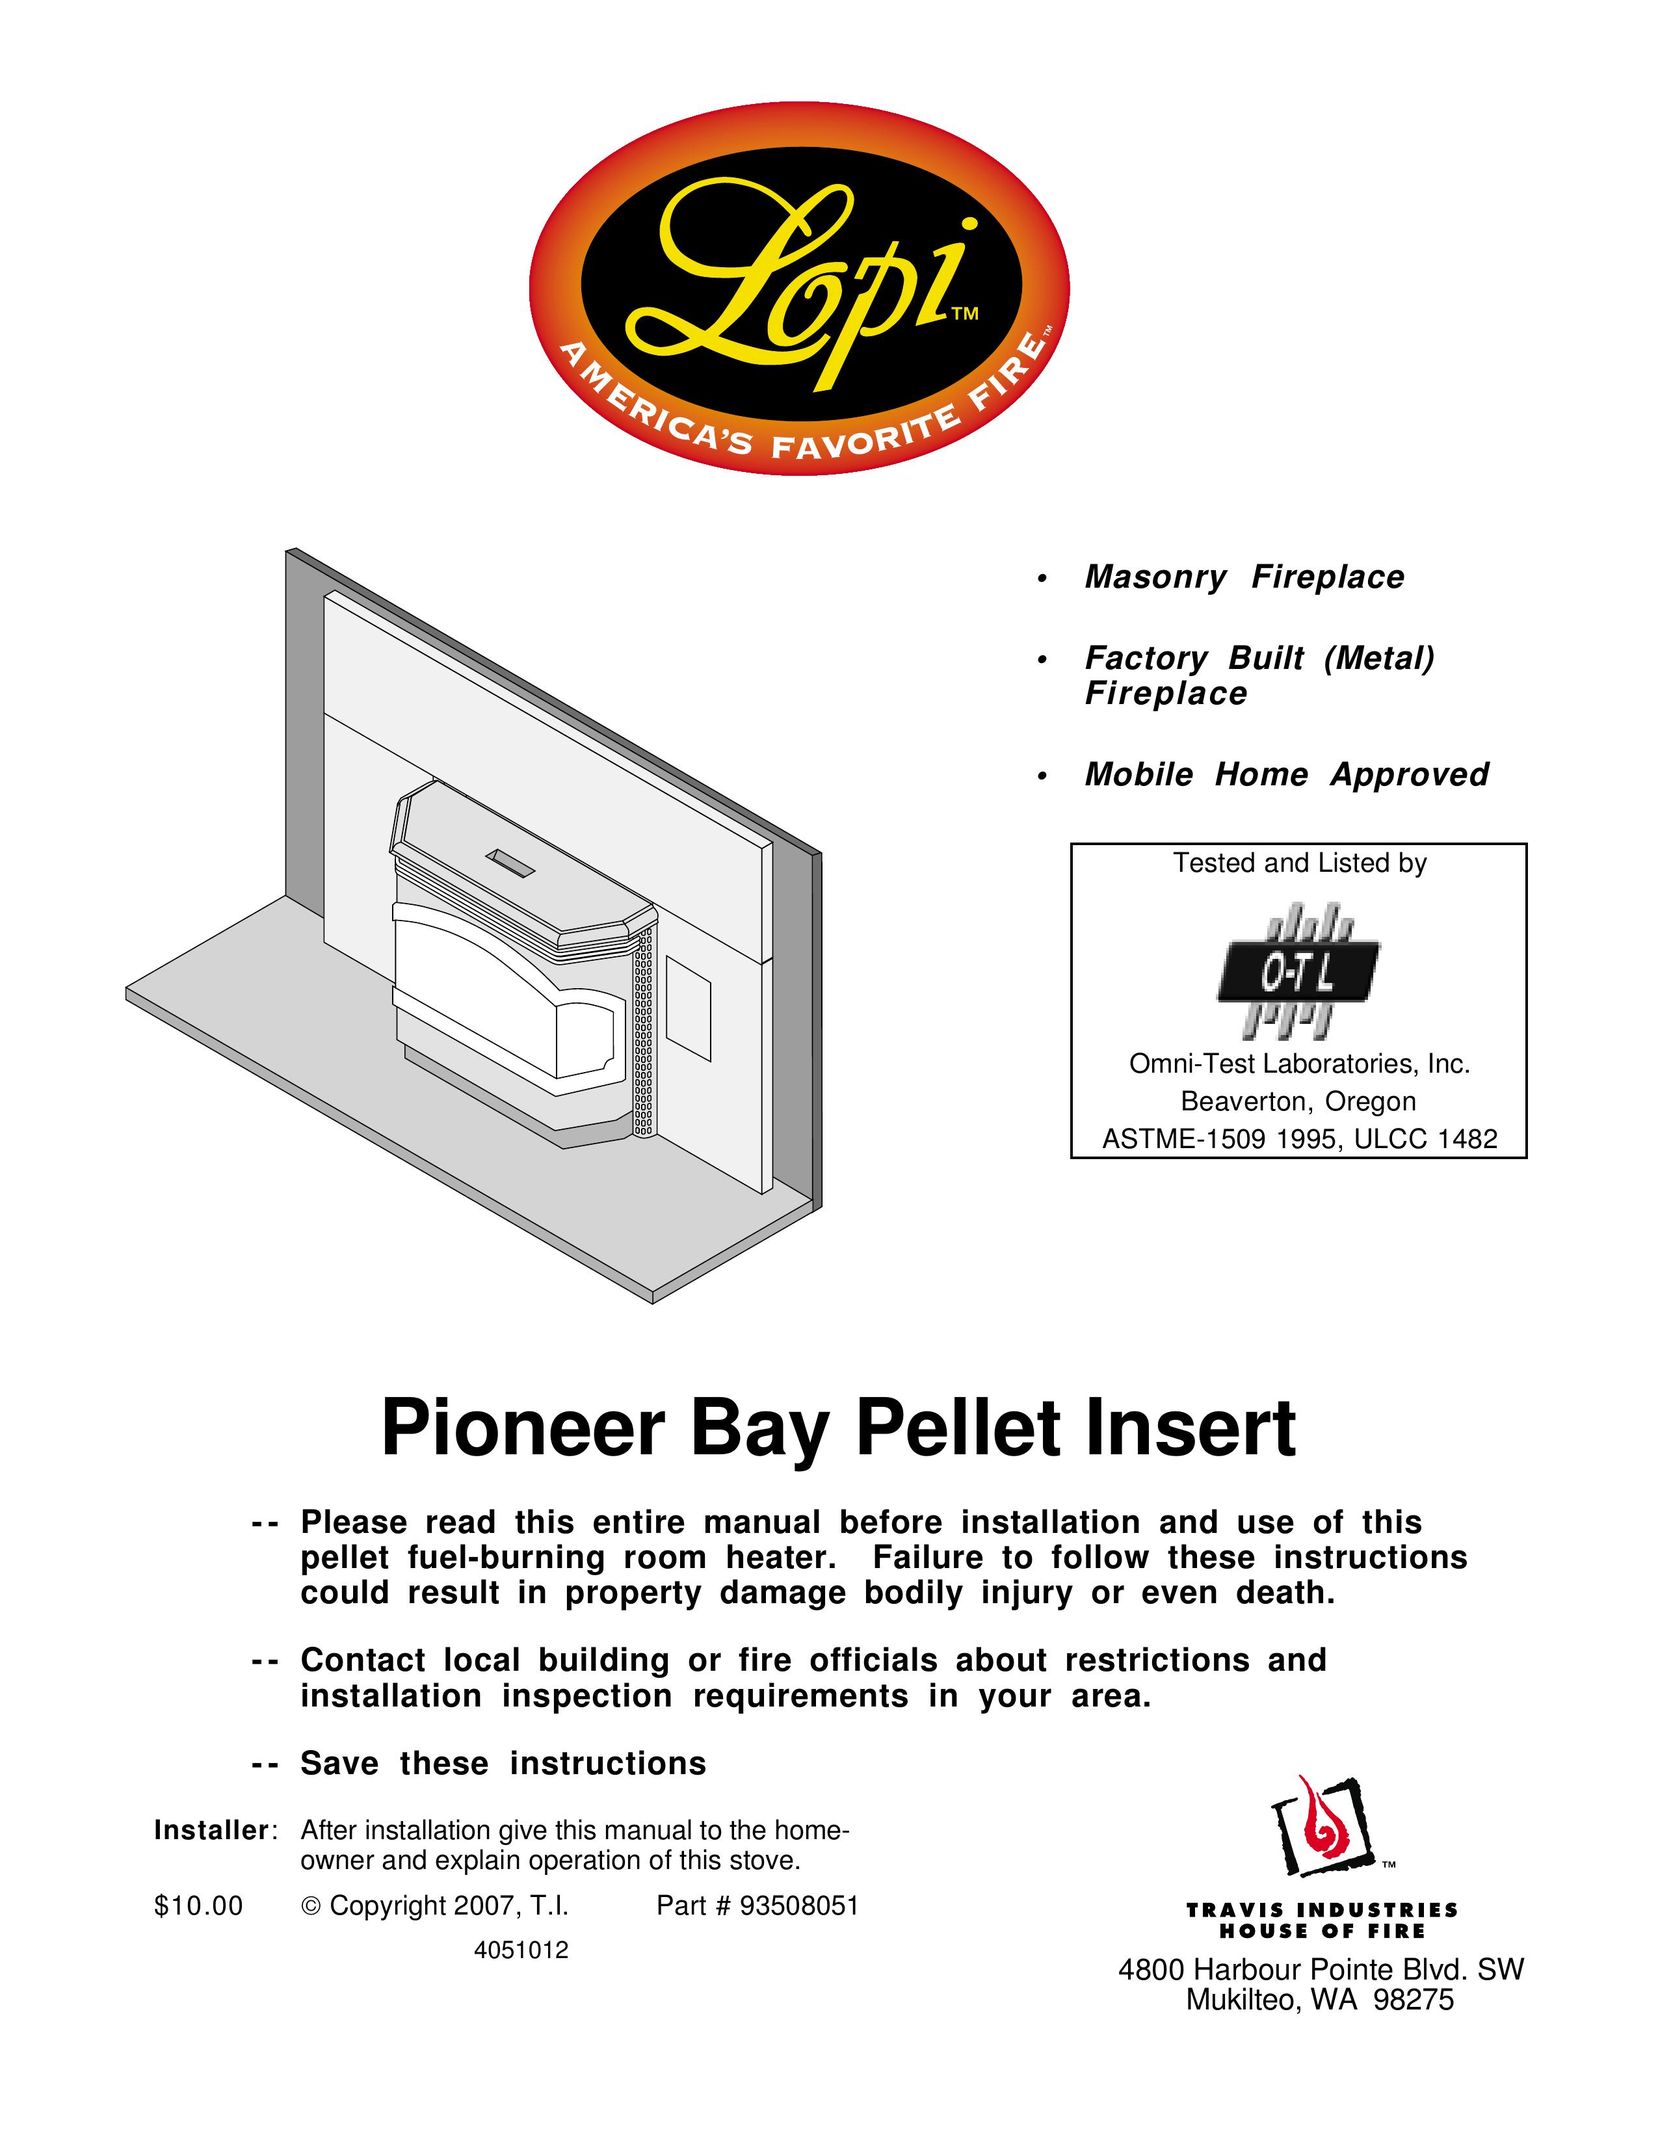 Lopi Masonry Fireplace Factory Built (Metal) Fireplace Mobile Home Model: Pioneer Bay (Heritage Bay PI) Indoor Fireplace User Manual